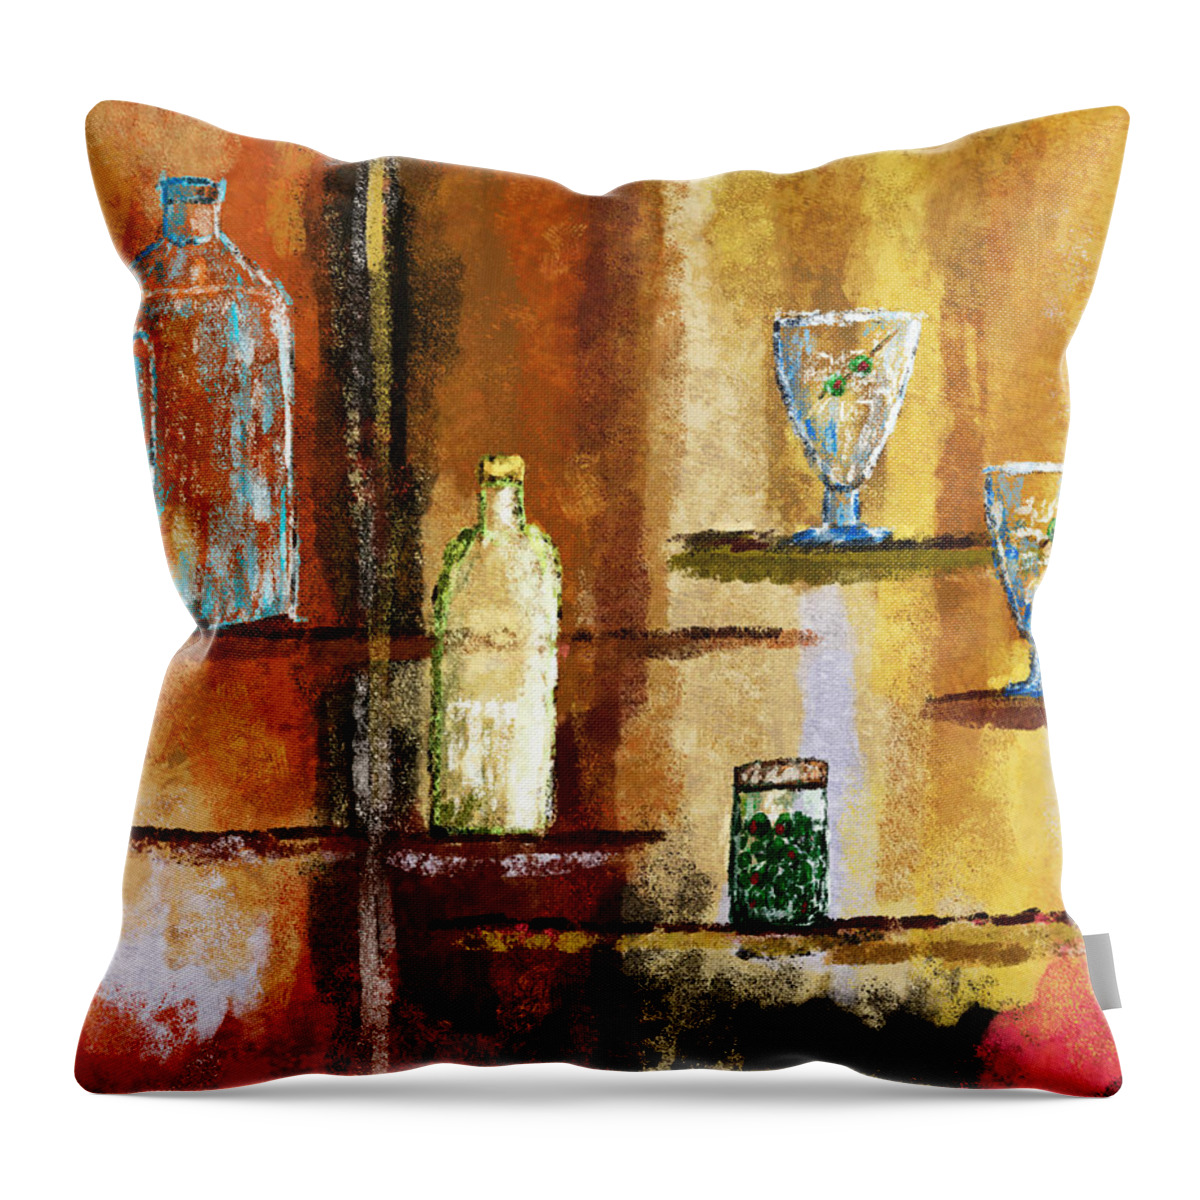 Gin Throw Pillow featuring the digital art Happy Hour by Ken Taylor